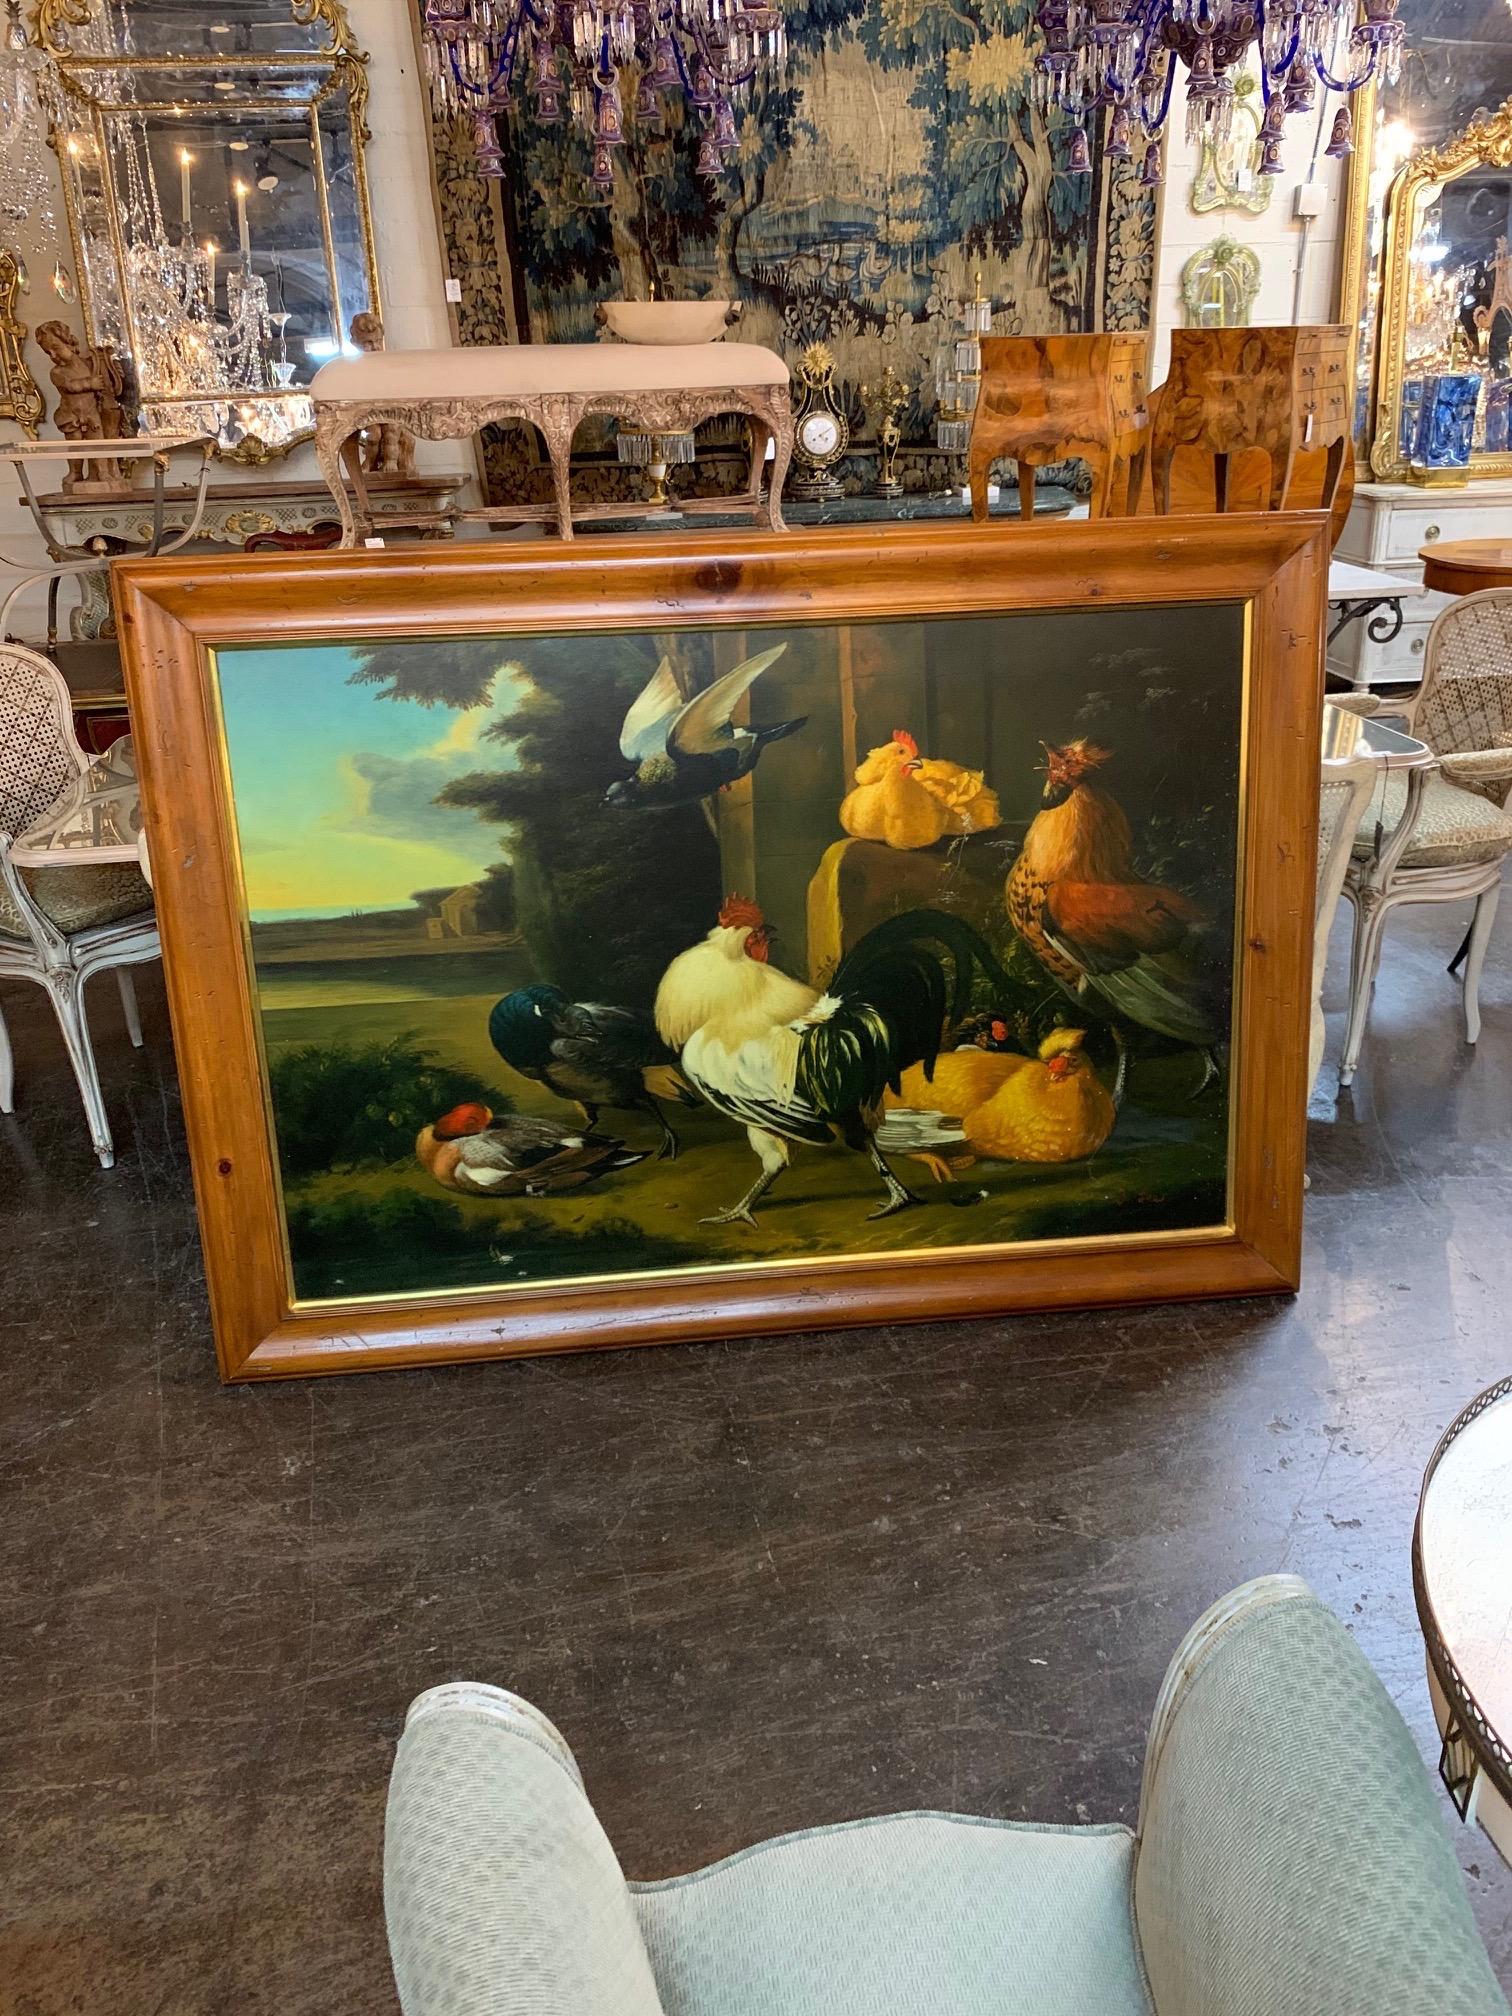 Very fine large scale European oil painting on canvas featuring chickens and roosters in a rural scene. Beautiful color and detail in this painting in a nice wooden frame.